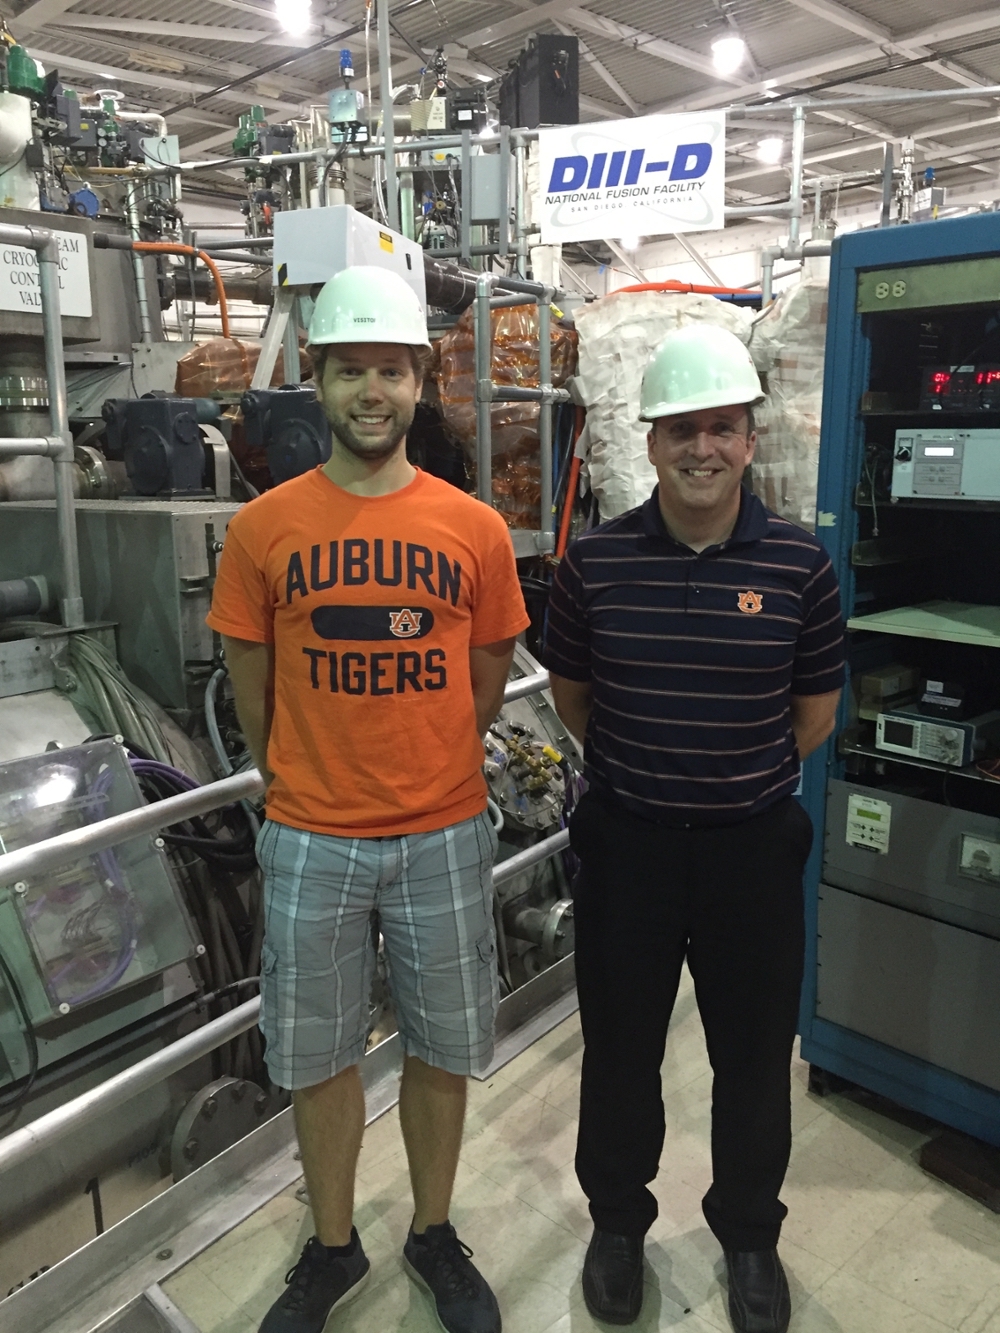 Graduate Student Curtis Johnson (left) and Professor Stuart Loch (right) standing in front of the DIII-D plasma physics experiment located in San Diego, CA.